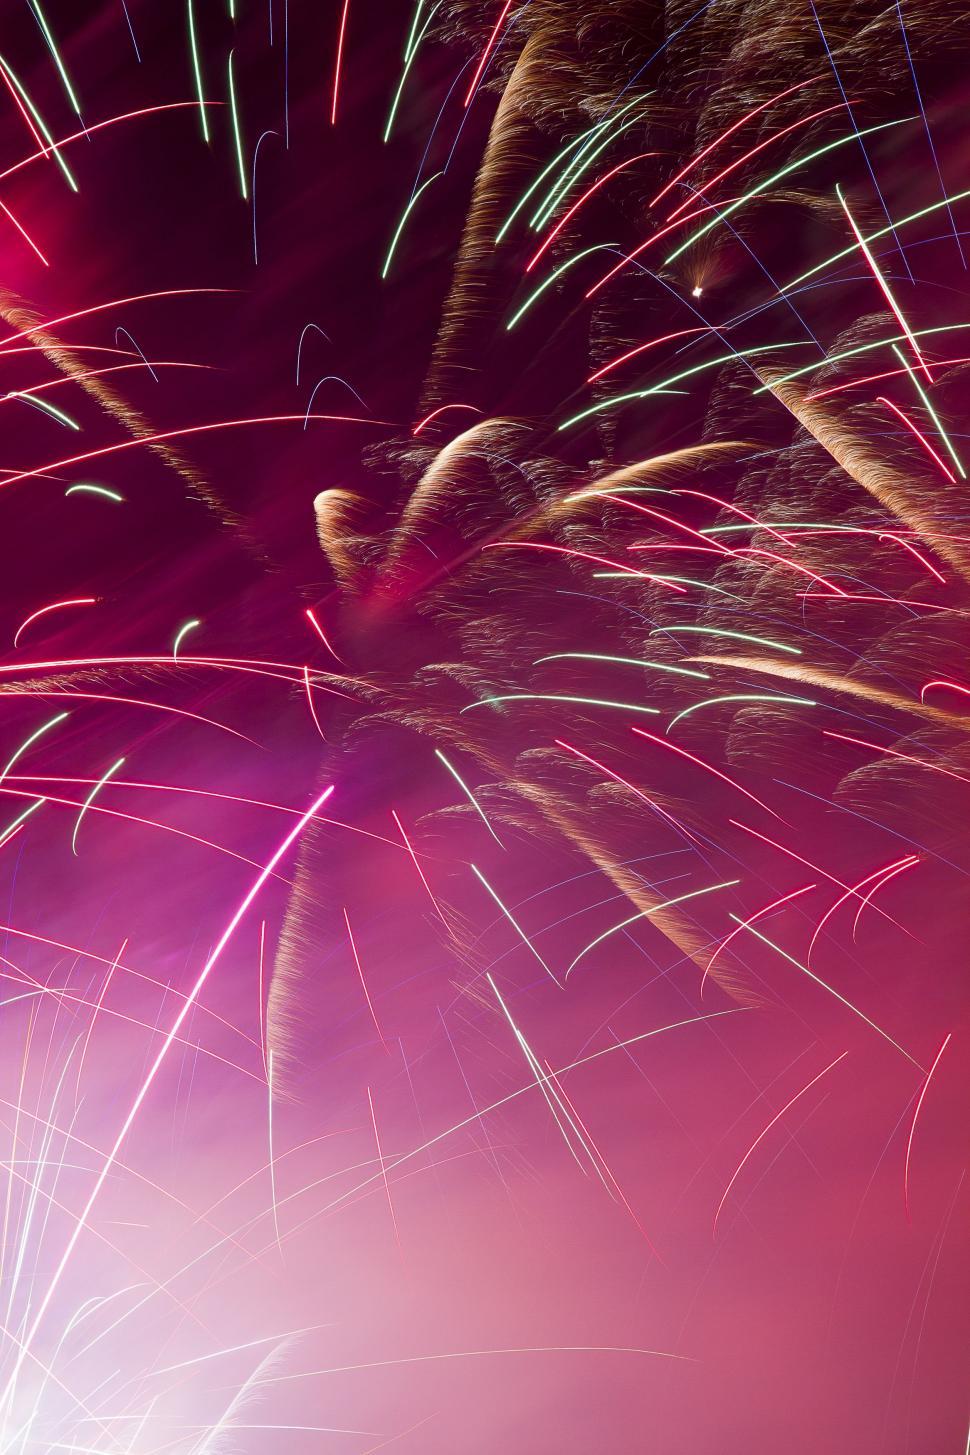 Free Image of PInk Sky And Fireworks  